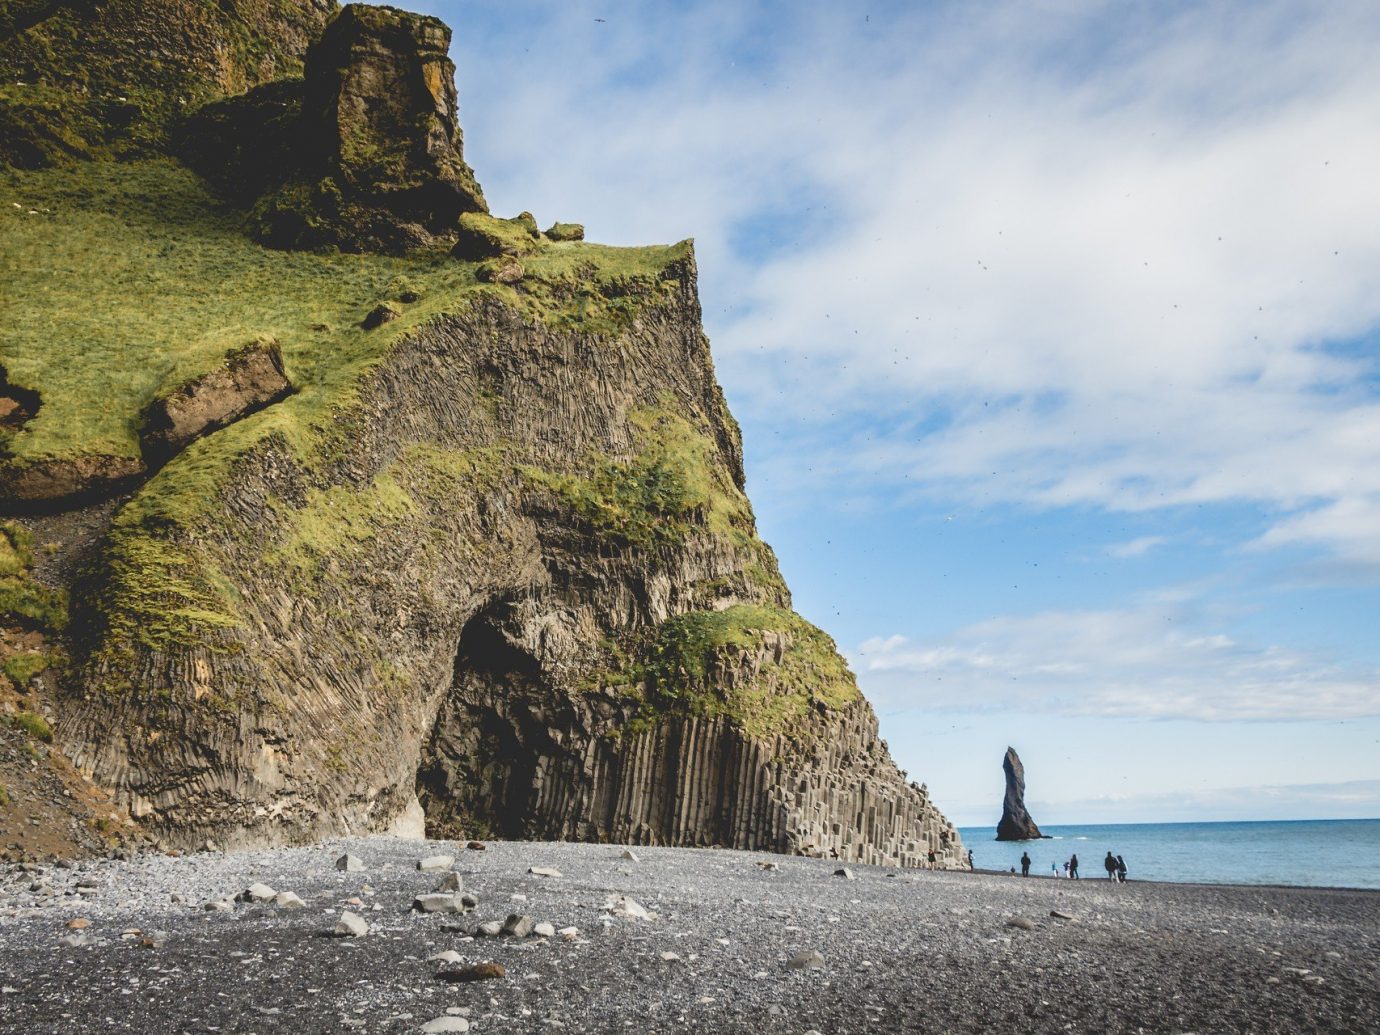 Adventure Beach black sand calm cave Greenery Hotels Iceland isolation Luxury Travel Nature Ocean Outdoor Activities people remote rock Rocks sand serene Travel Tips Trip Ideas outdoor Sea Coast cliff body of water shore vacation terrain cape tower bay material Ruins